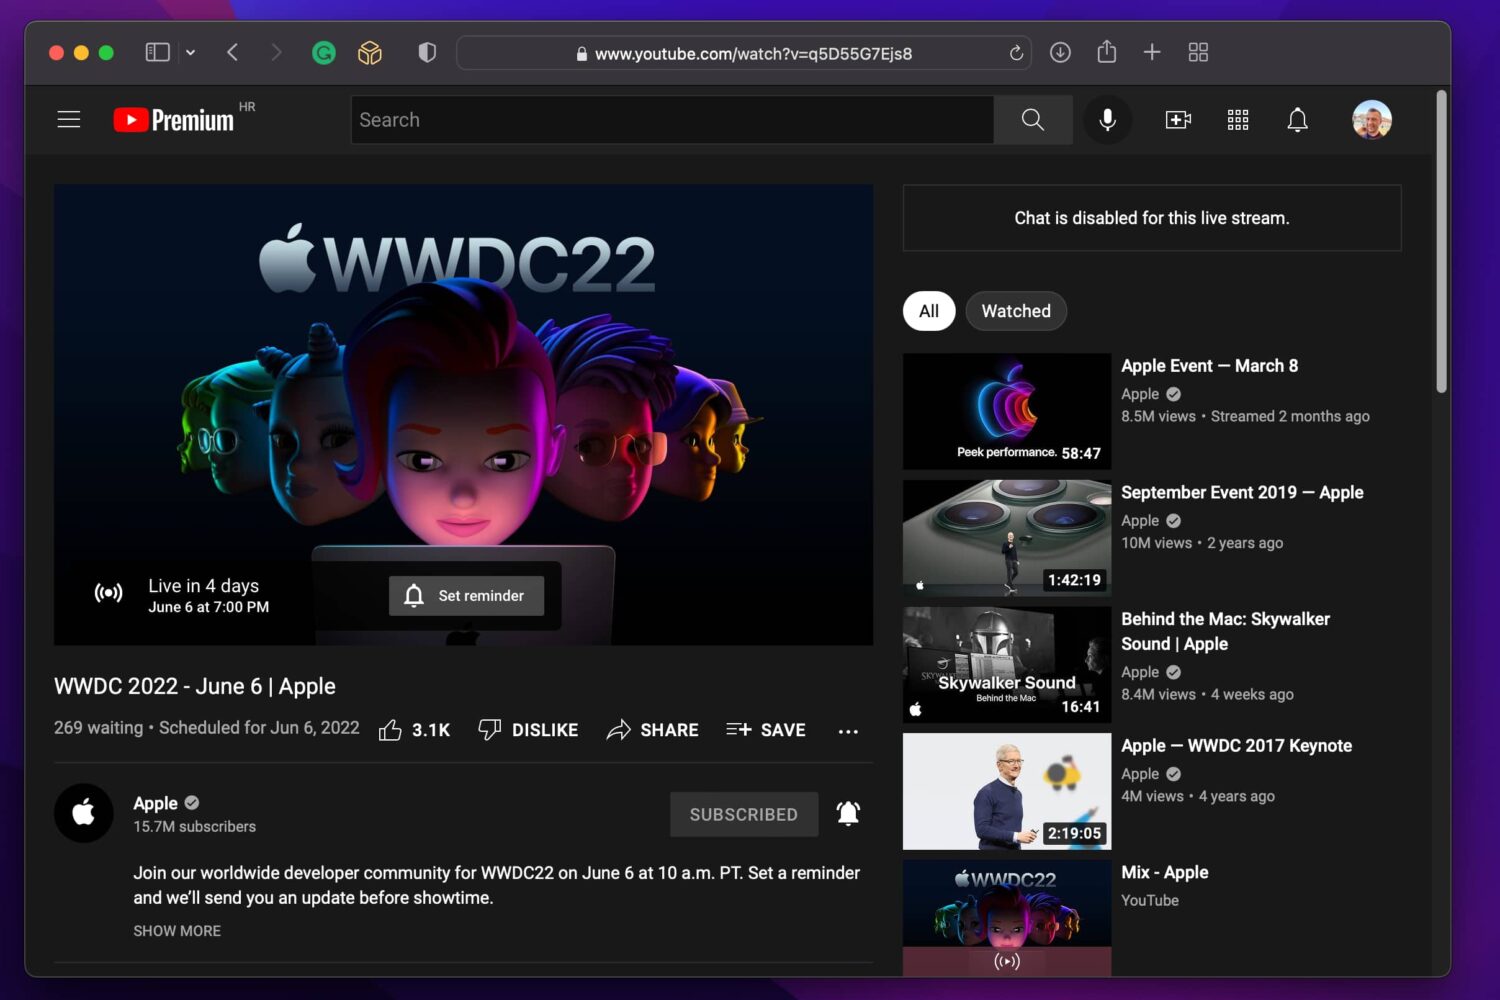 Apple's official YouTube channelis showcased in this Safari for Mac screenshot, with a prominent "Set reminder" button featured on top of the WWDC 2022 live stream placeholder image